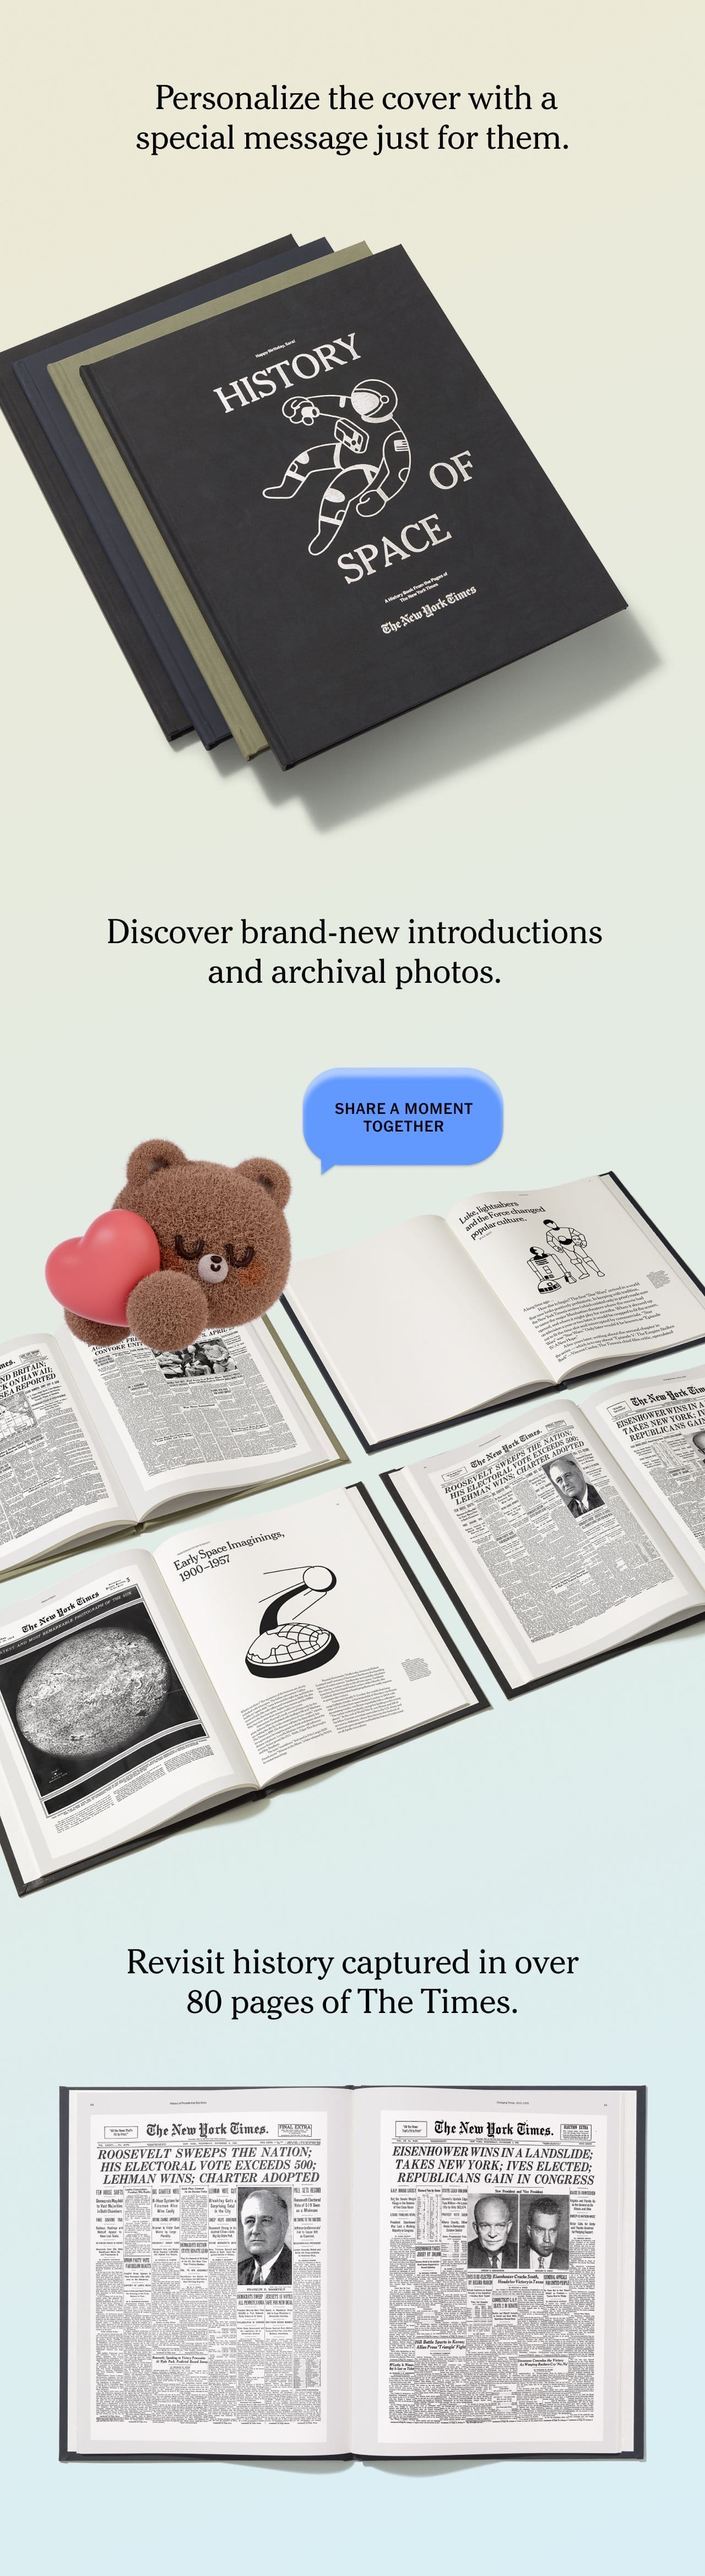  Personalize the cover with a special message just for them. Discover brand-new introductions and archival photos. Revisit history captured in over 80 pages of The Times.